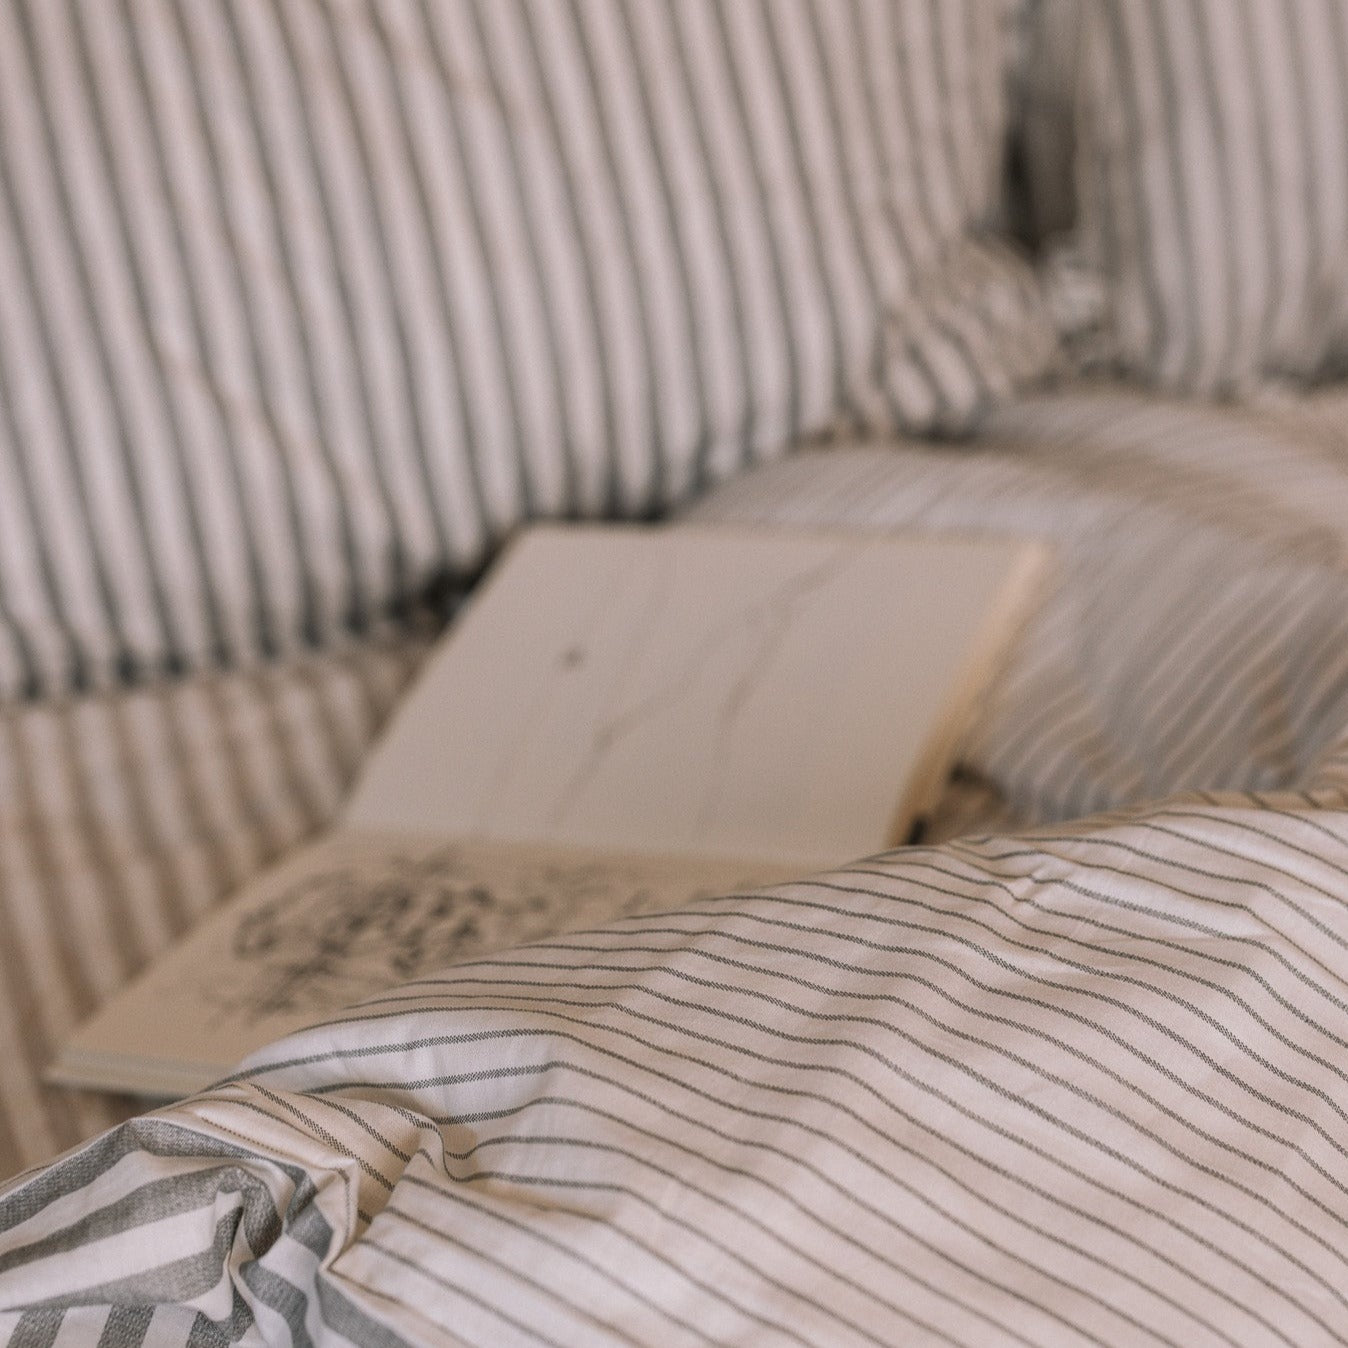 Grey Striped Bedding with an open book.